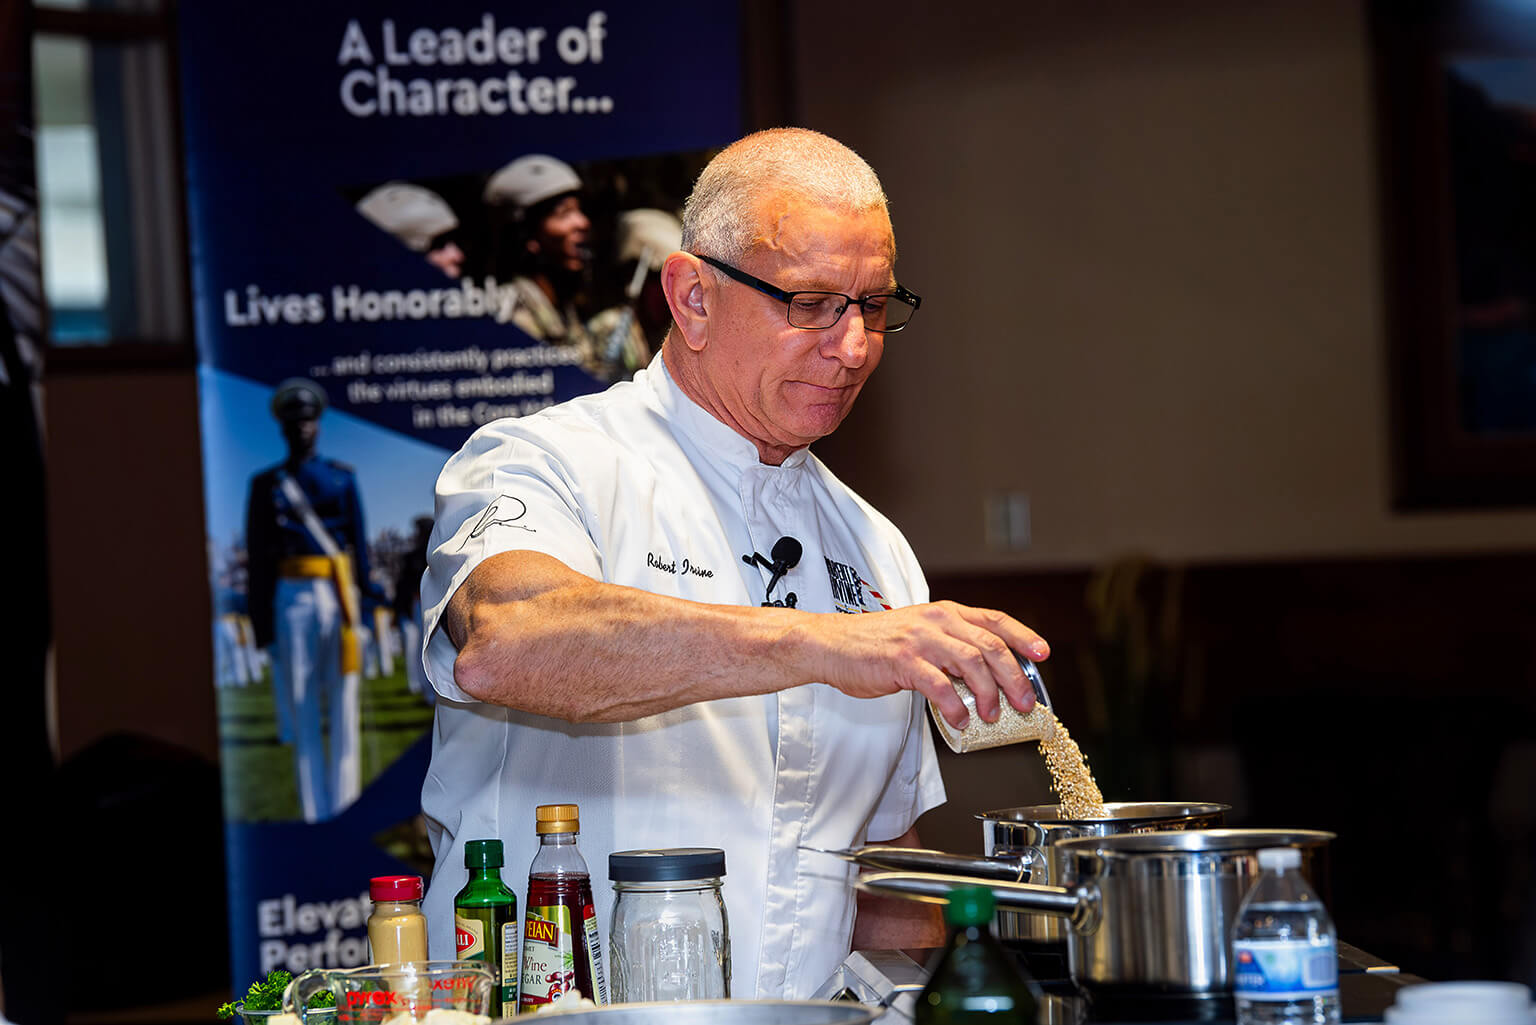 Celebrity chef Robert Irvine prepares a dish during a cooking demonstration.